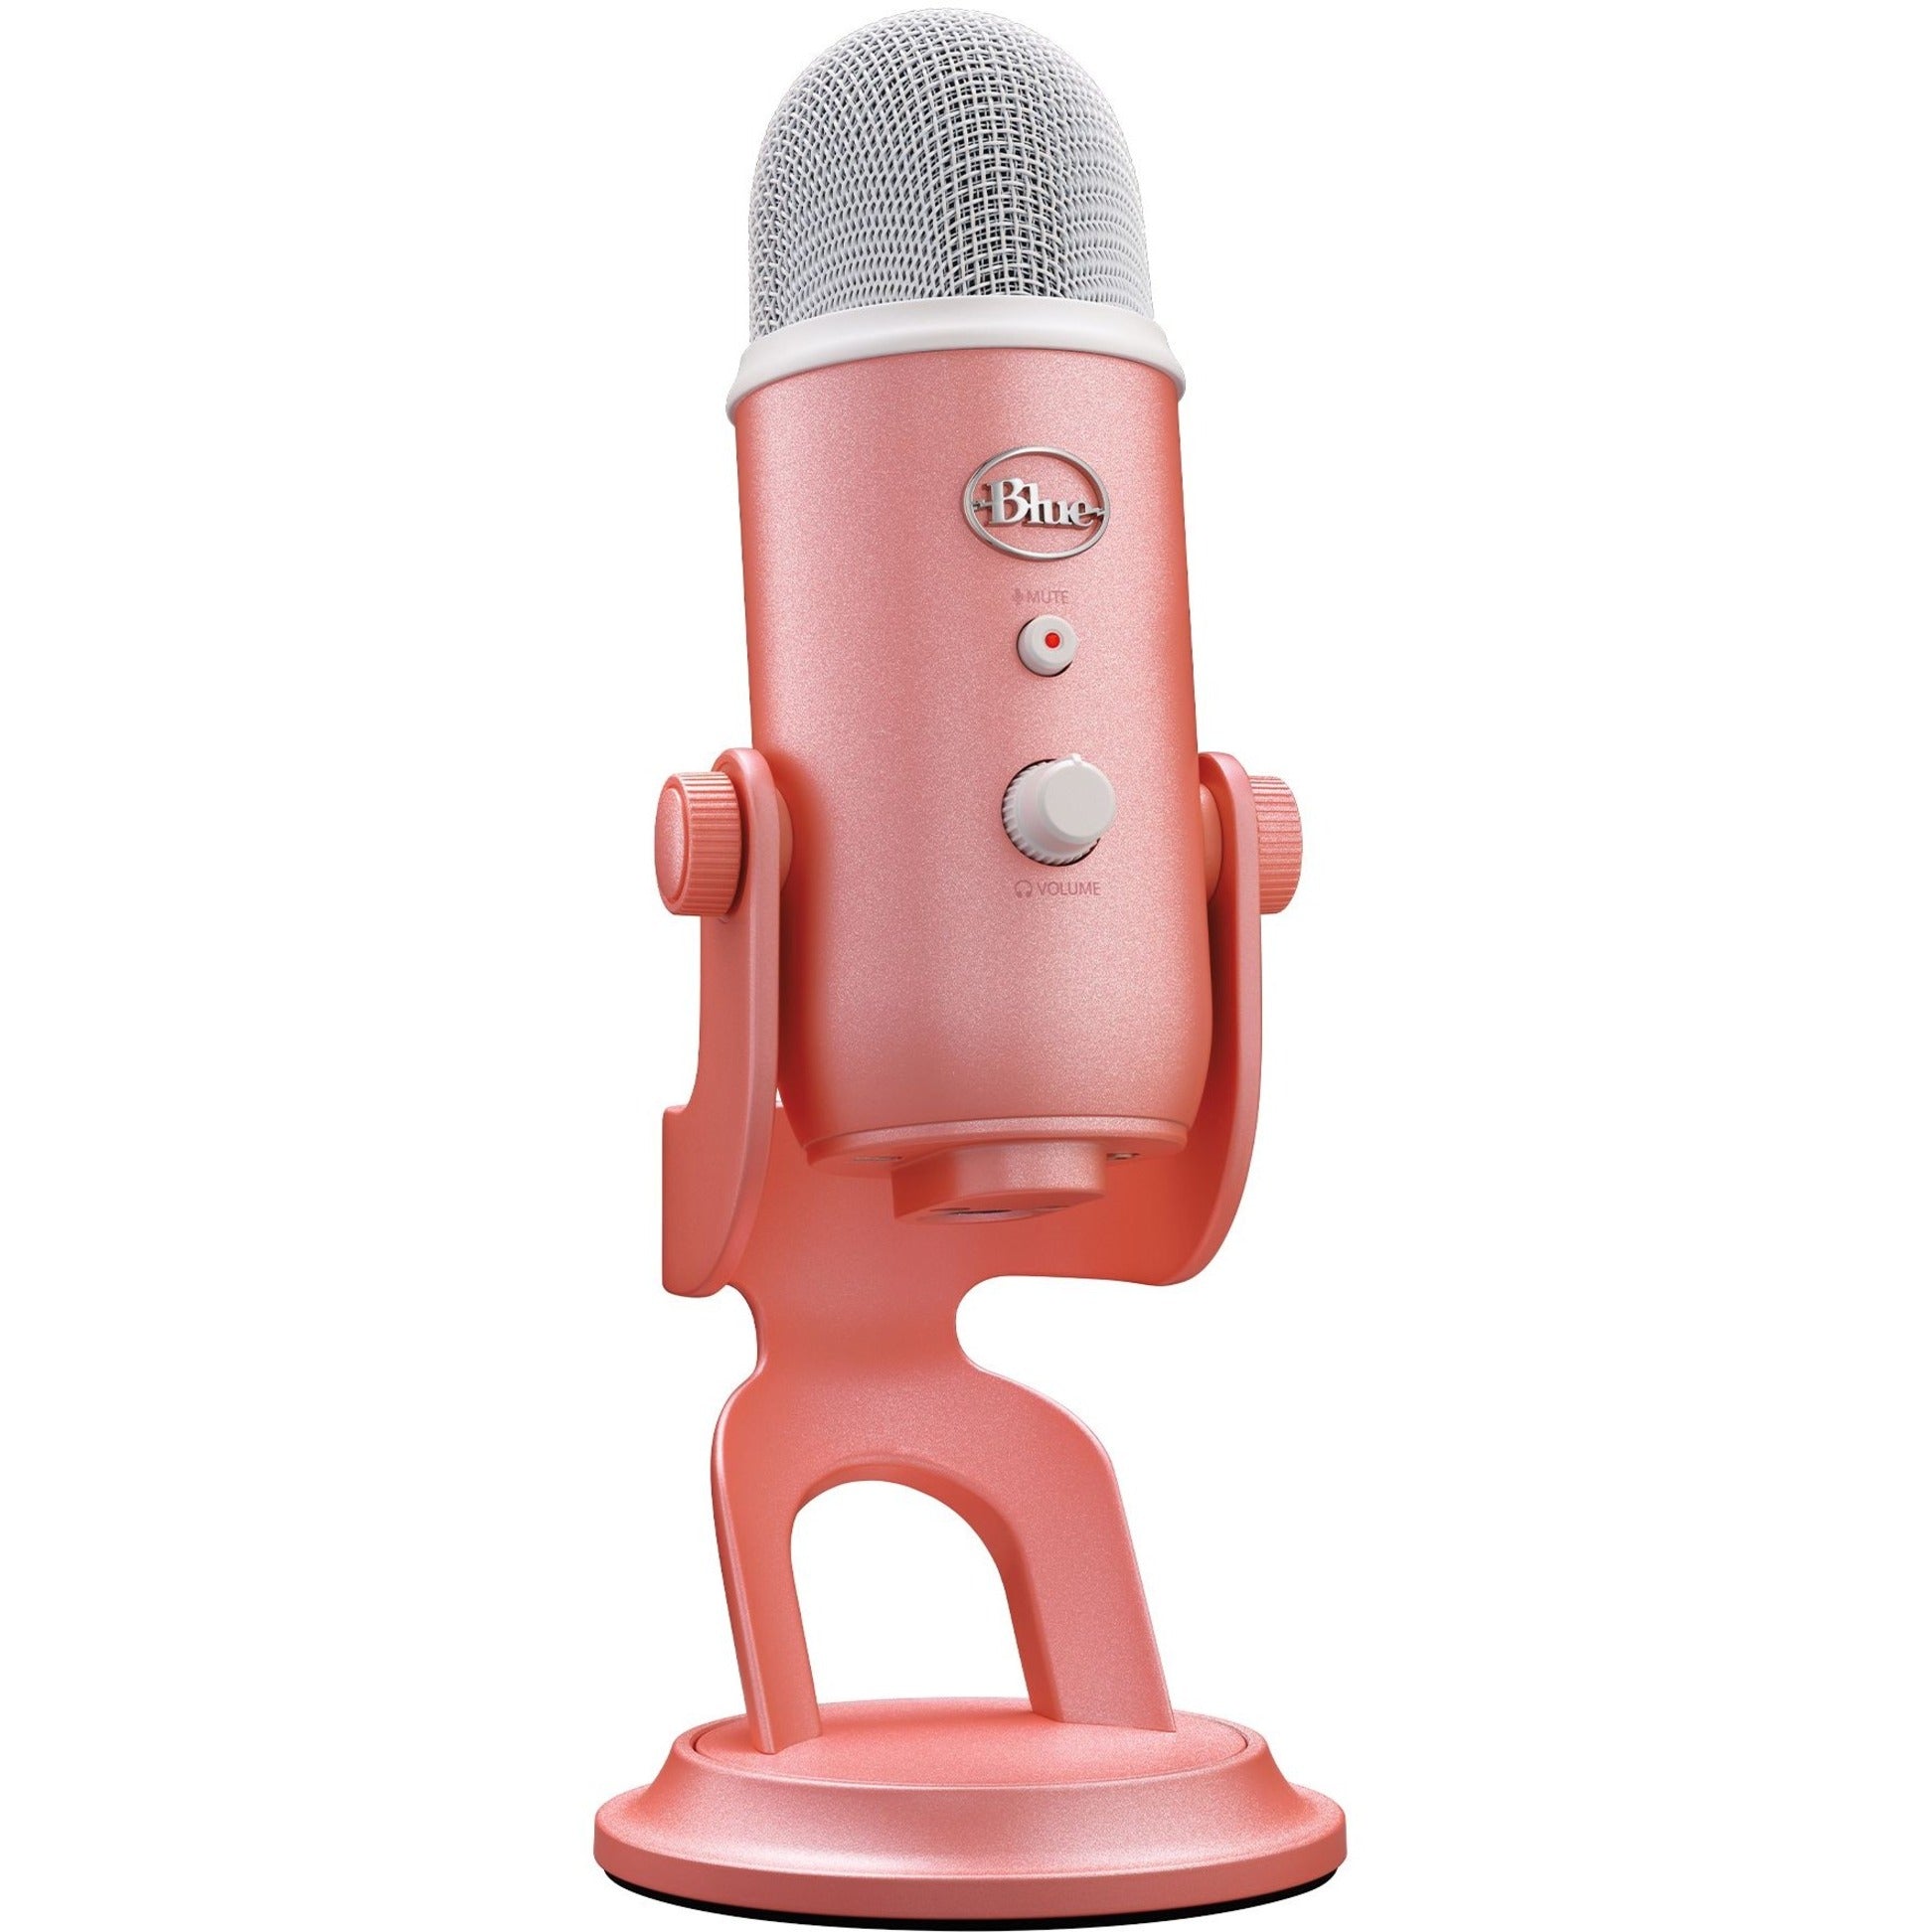 Blue 988-000530 Yeti Microphone, Pink Dawn - Ideal for Podcasting, Live Streaming, and Home Studio